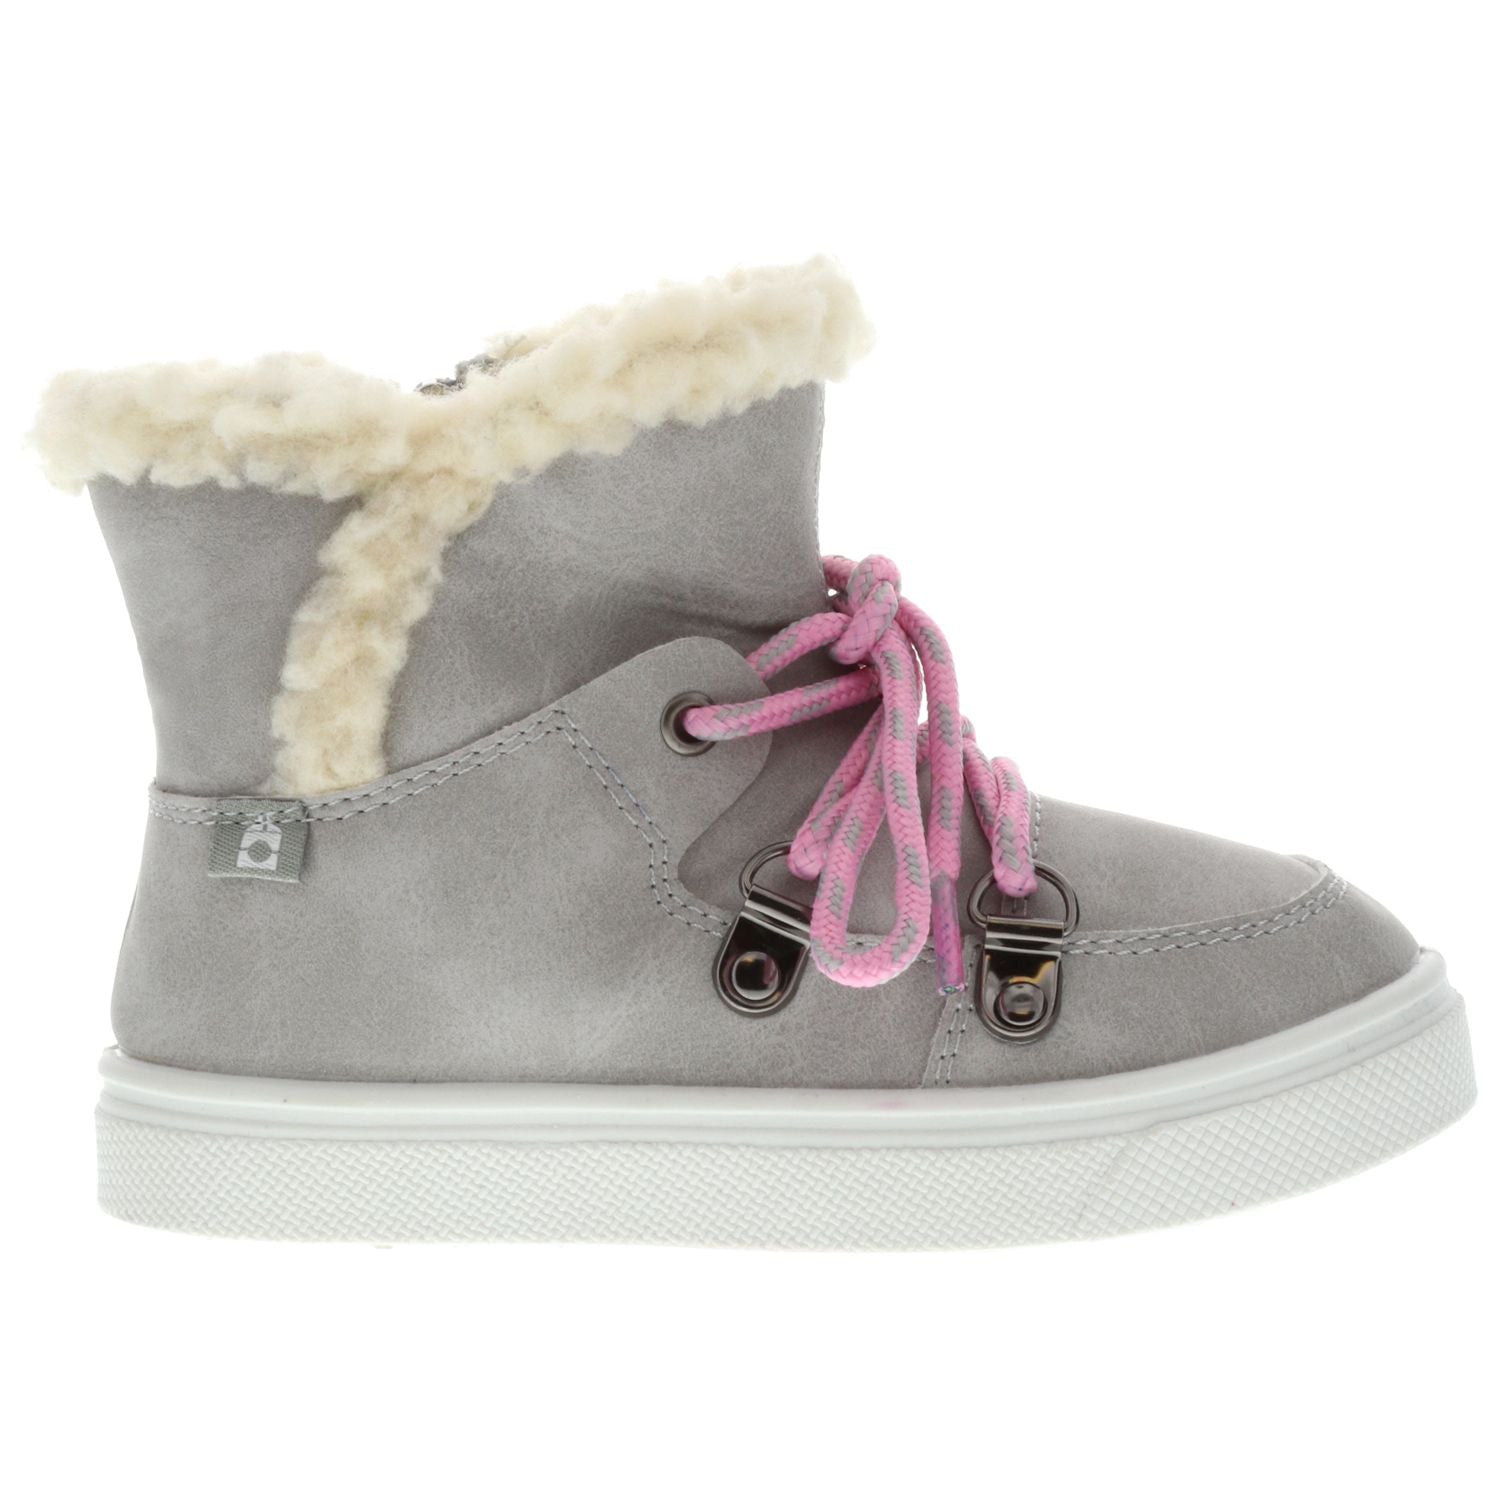 Oomphies Nellie Young Girls Shoes 5-12 